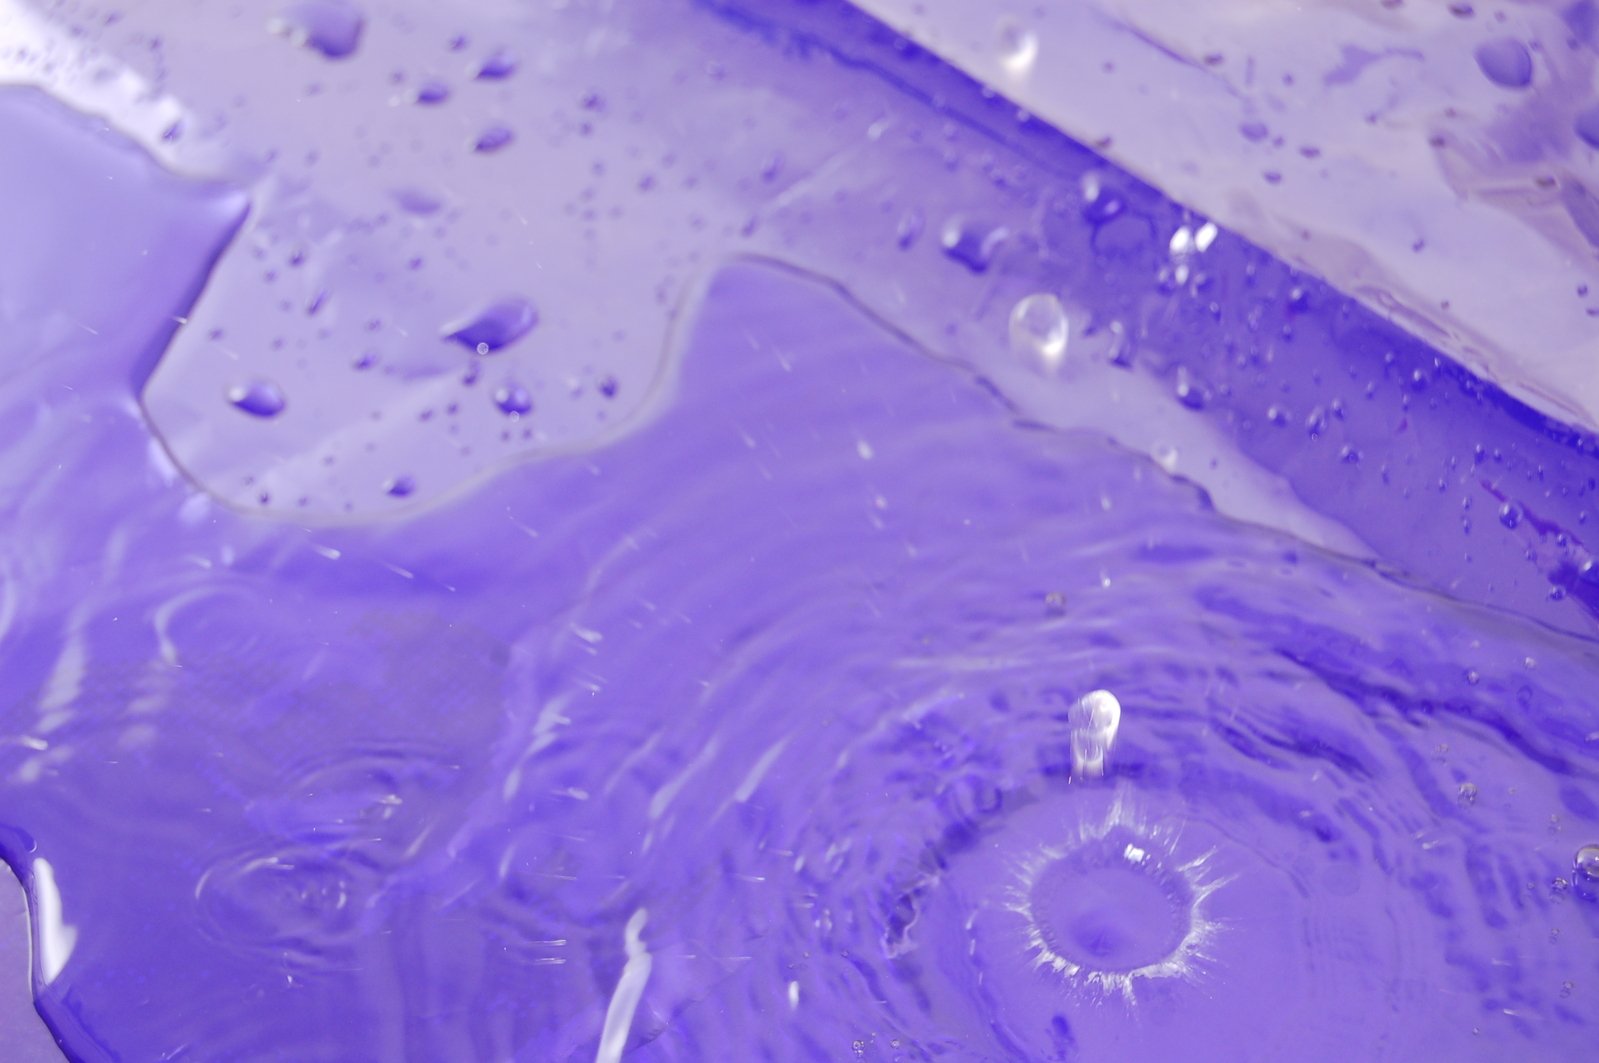 a close - up view of some purple liquid that is leaking on it